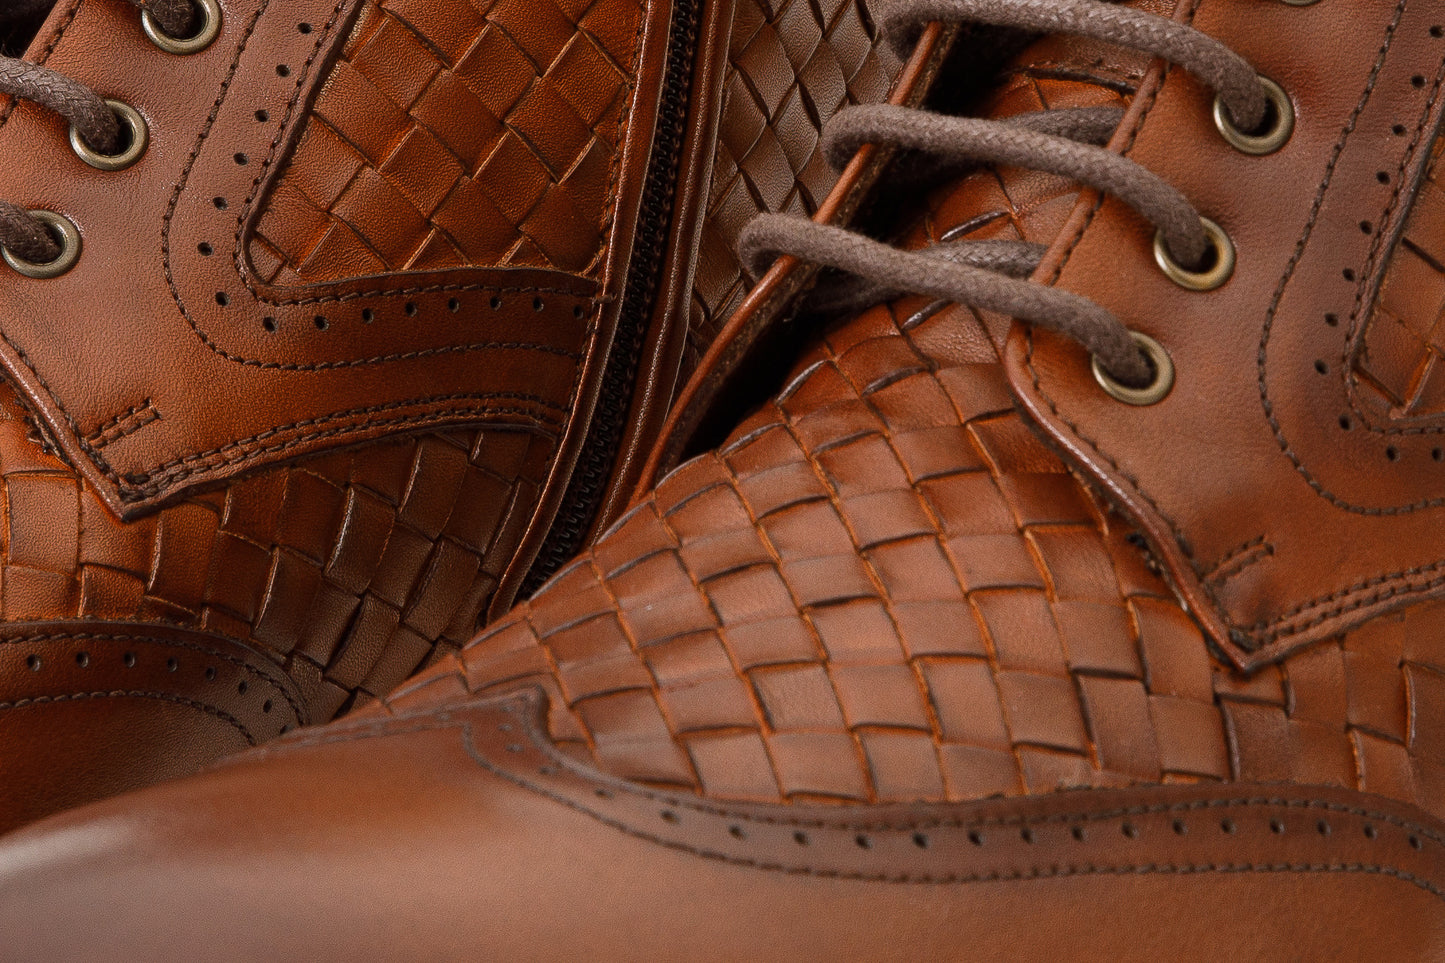 The Loddon Tan Leather Wingtip Brogue Handwoven Lace-Up Men Boot with a Zipper